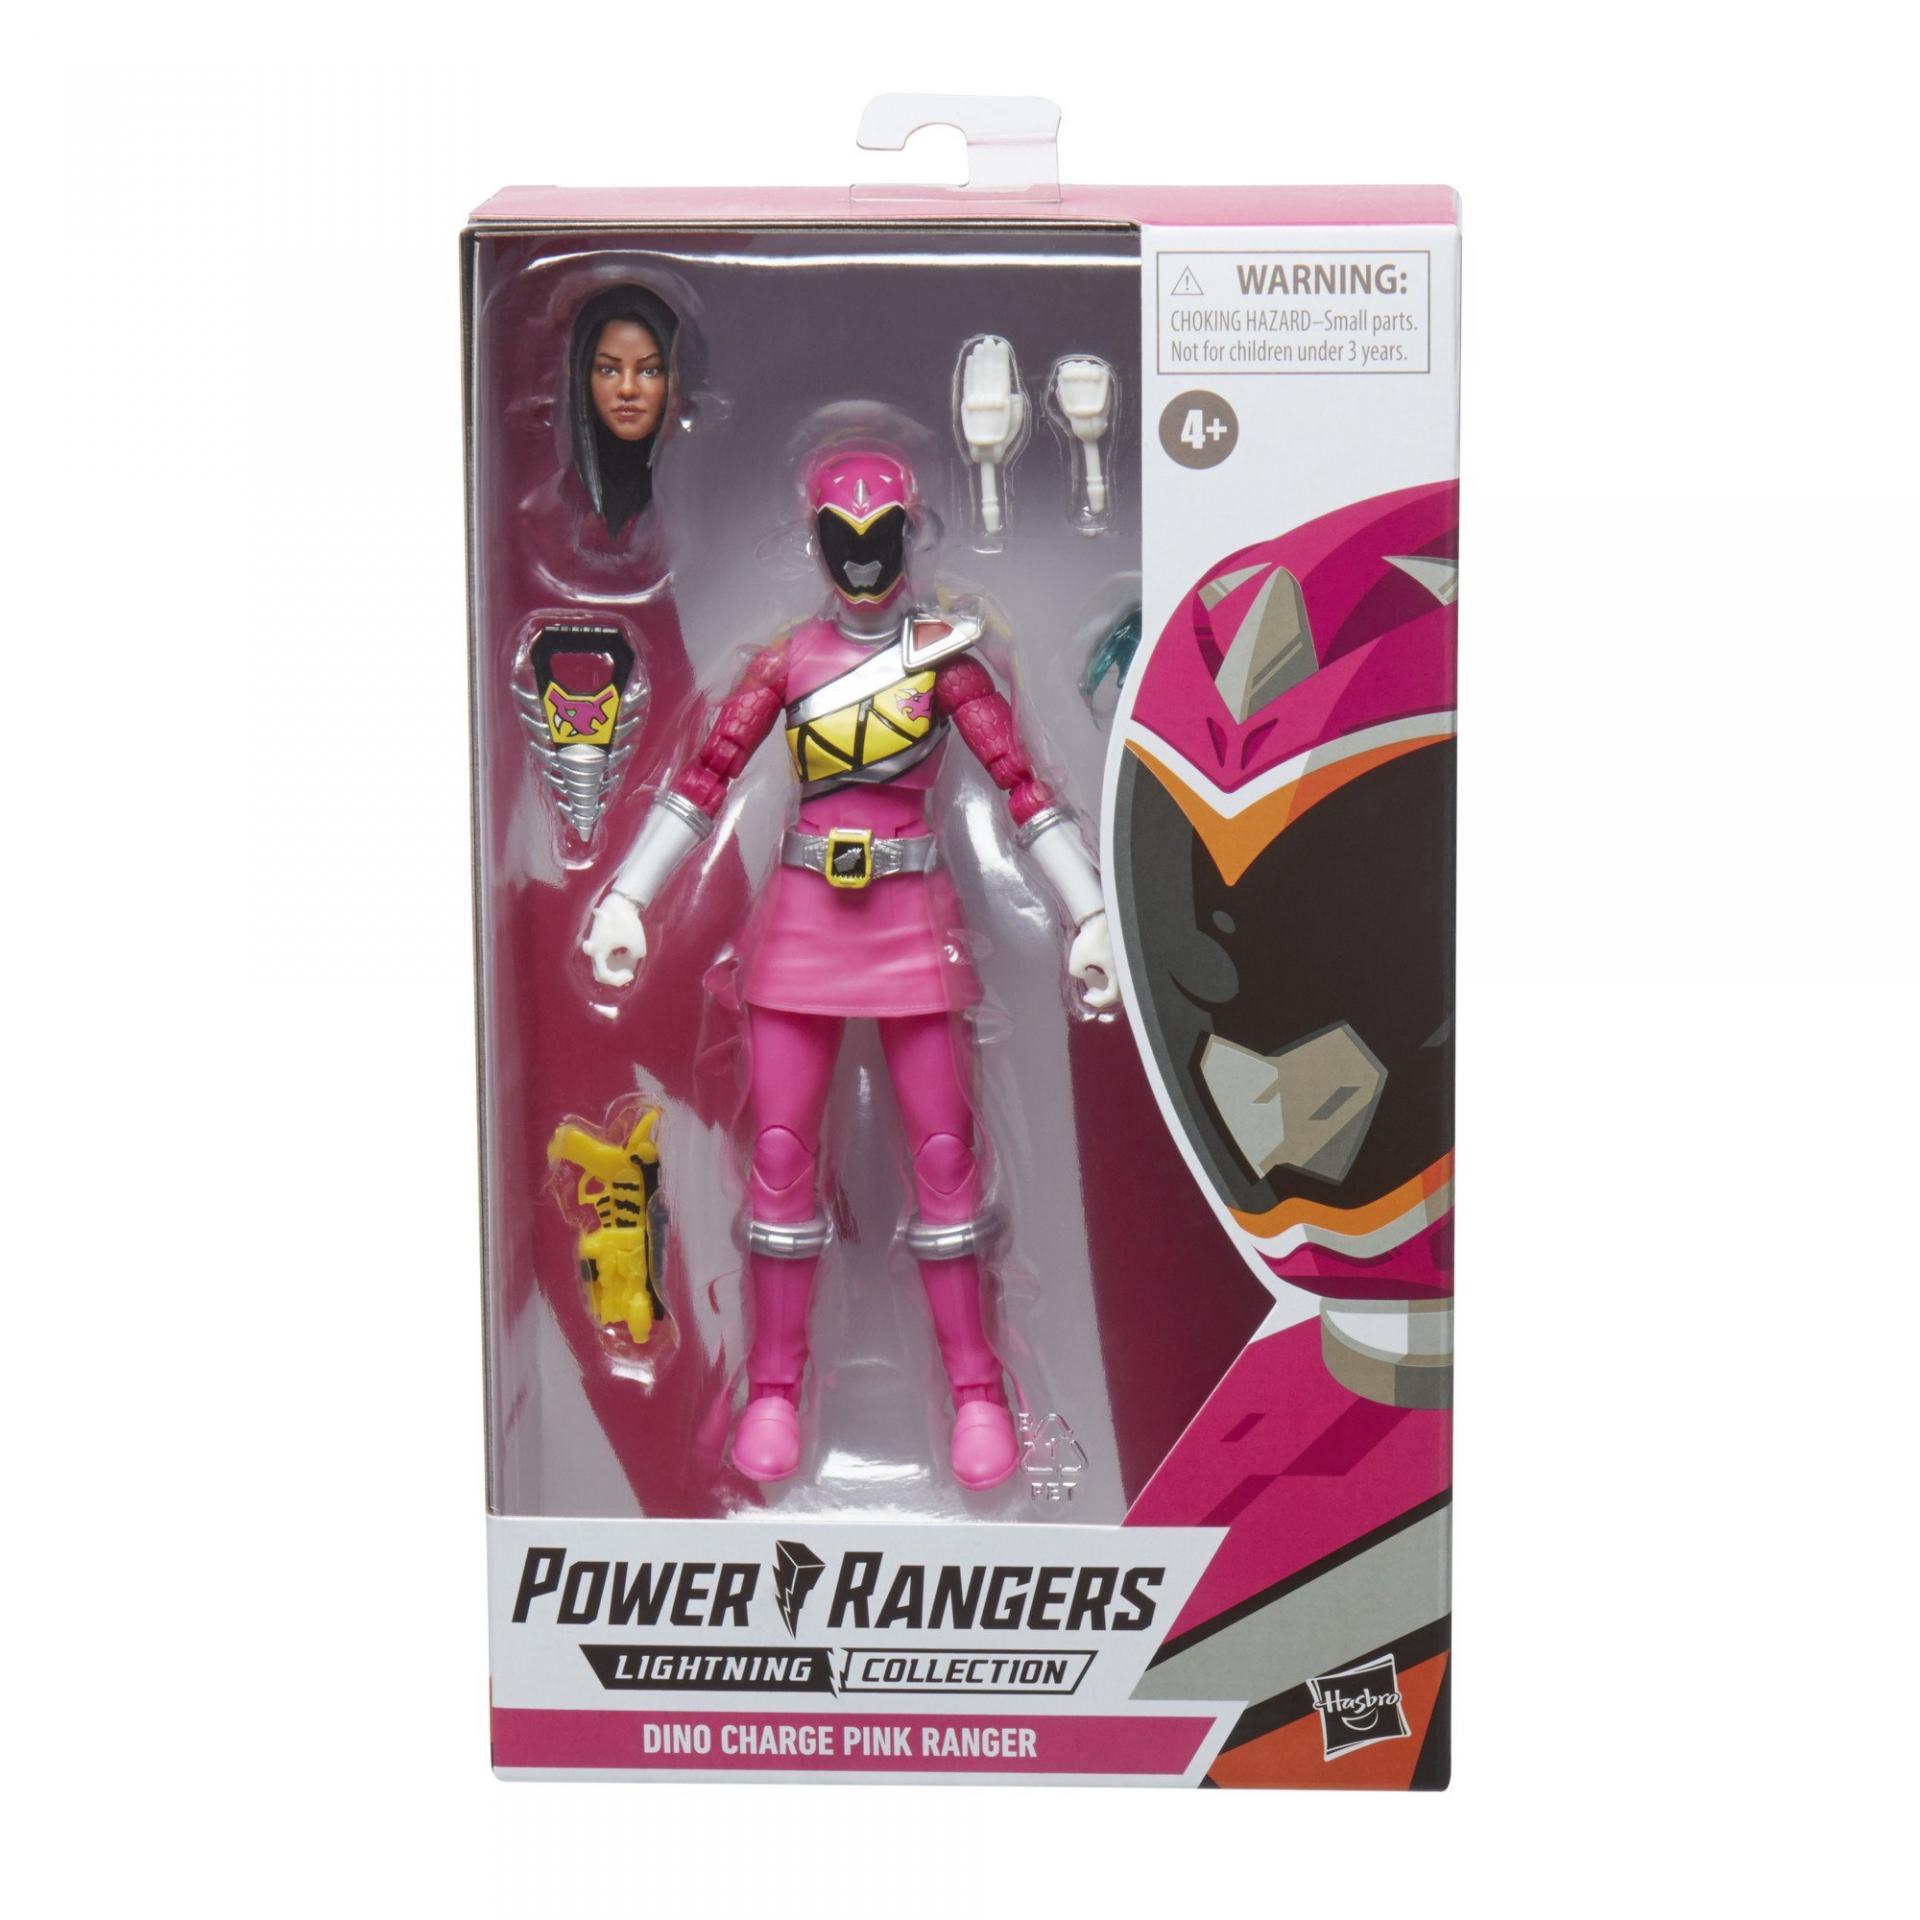 Power rangers lightning collection dino charge pink ranger5